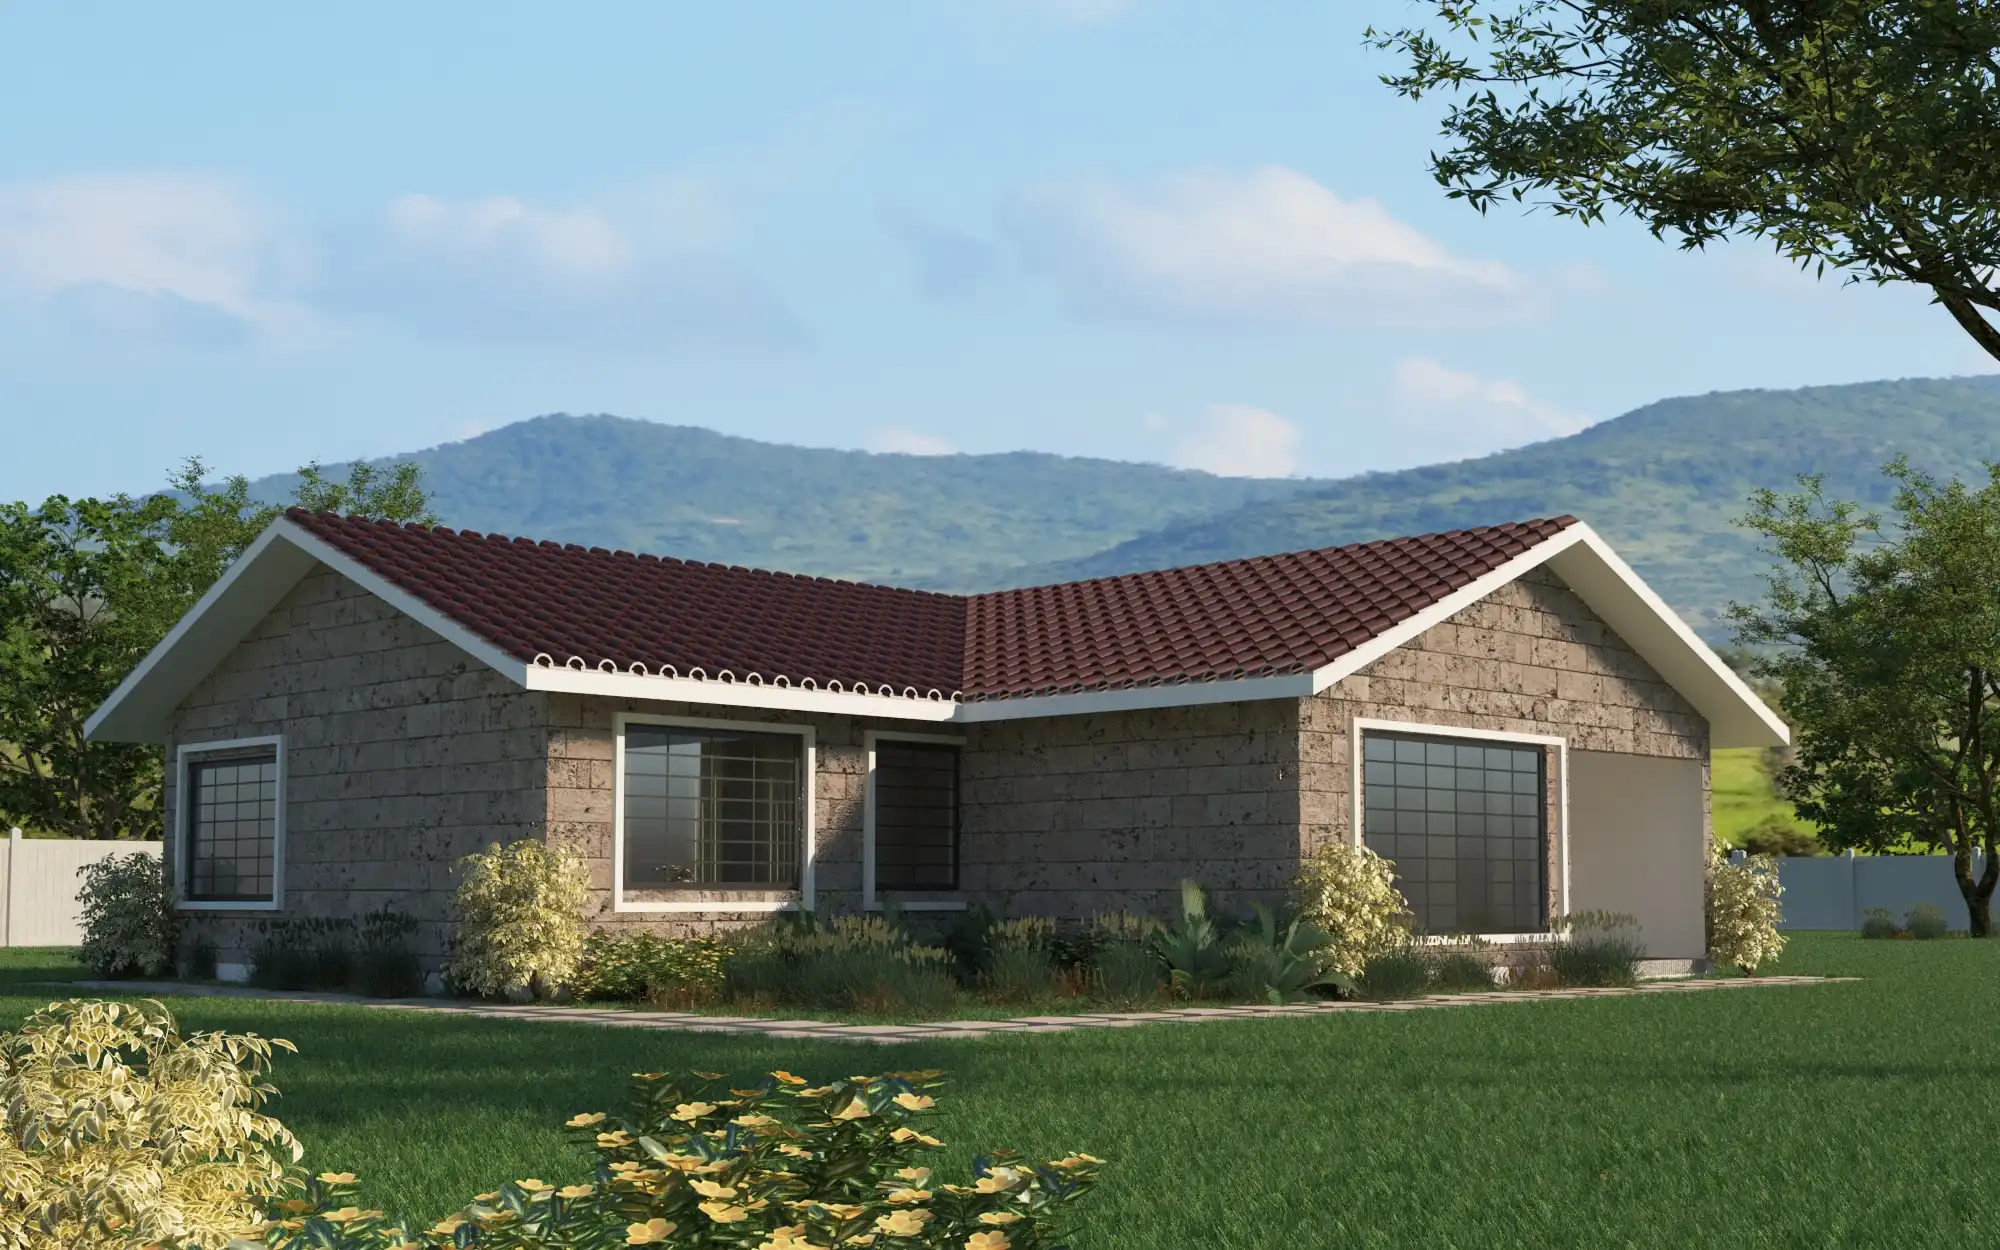 4 Bedroom Bungalow - ID 4151 - 4 BED BNGL TP5.3 OP1 REAR.jpg from Inuua Tujenge house plans with 4 bedrooms and 2 bathrooms. ( bungalow )